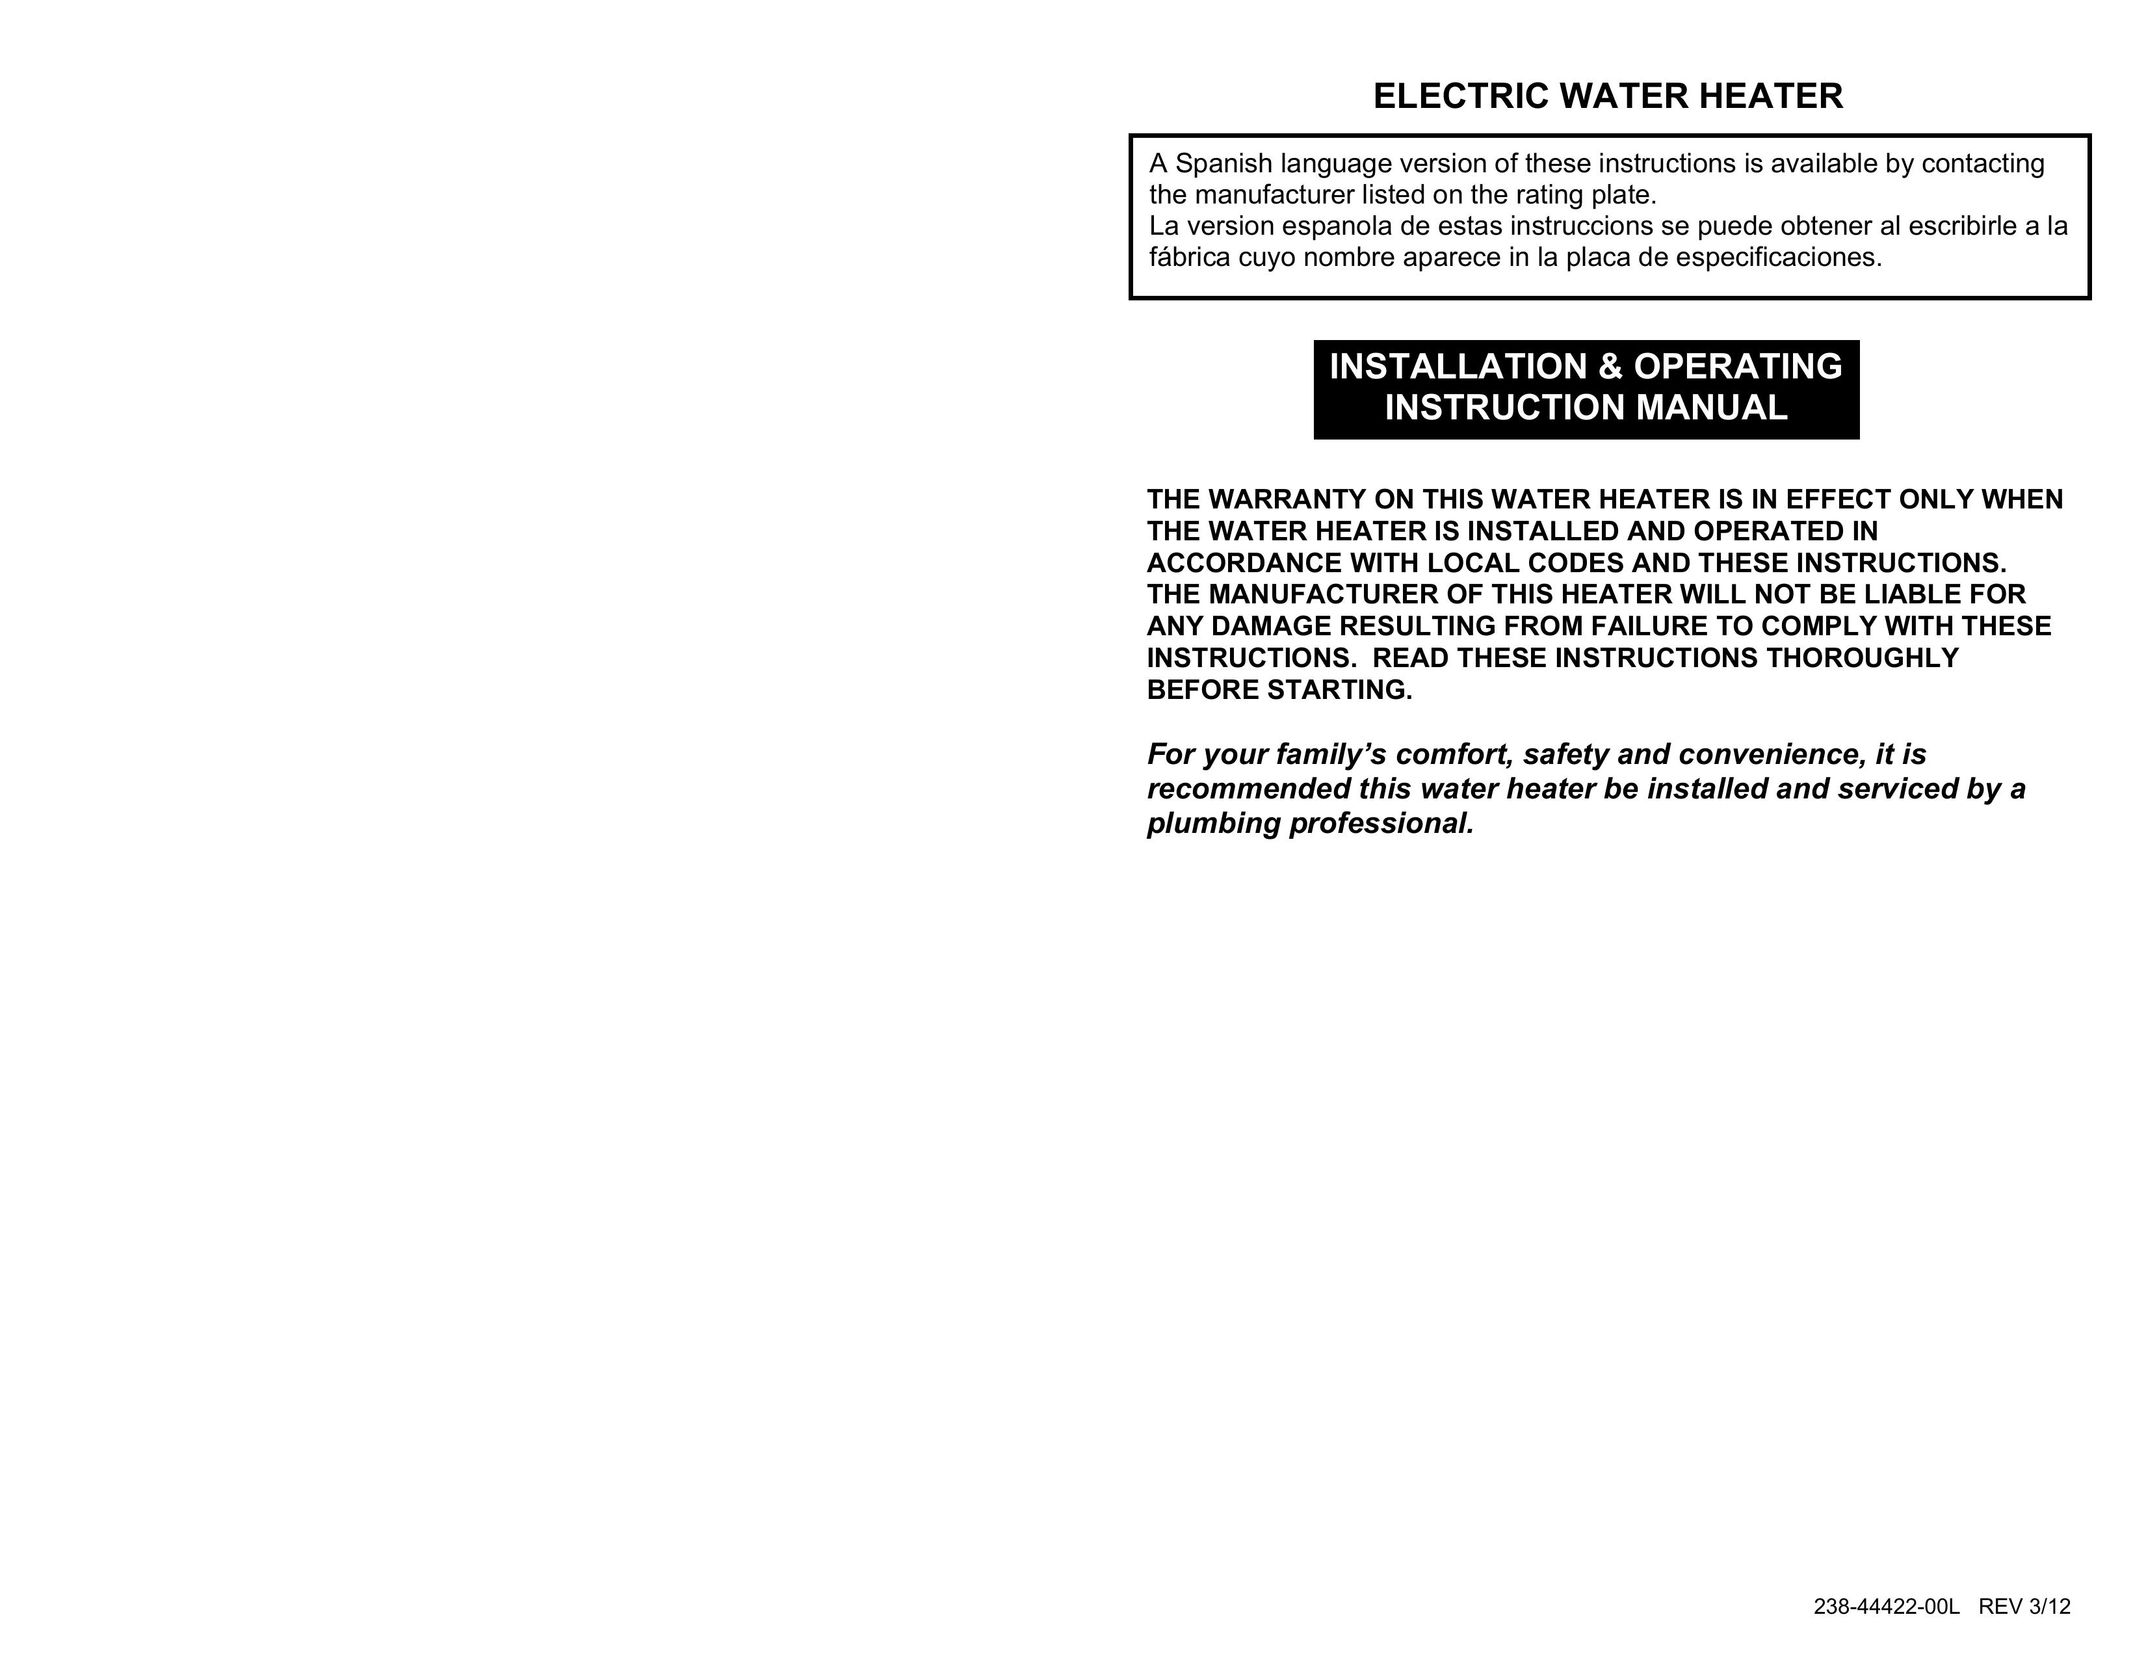 Hubbell Electric Heater Company 238-44422-00L Electric Heater User Manual